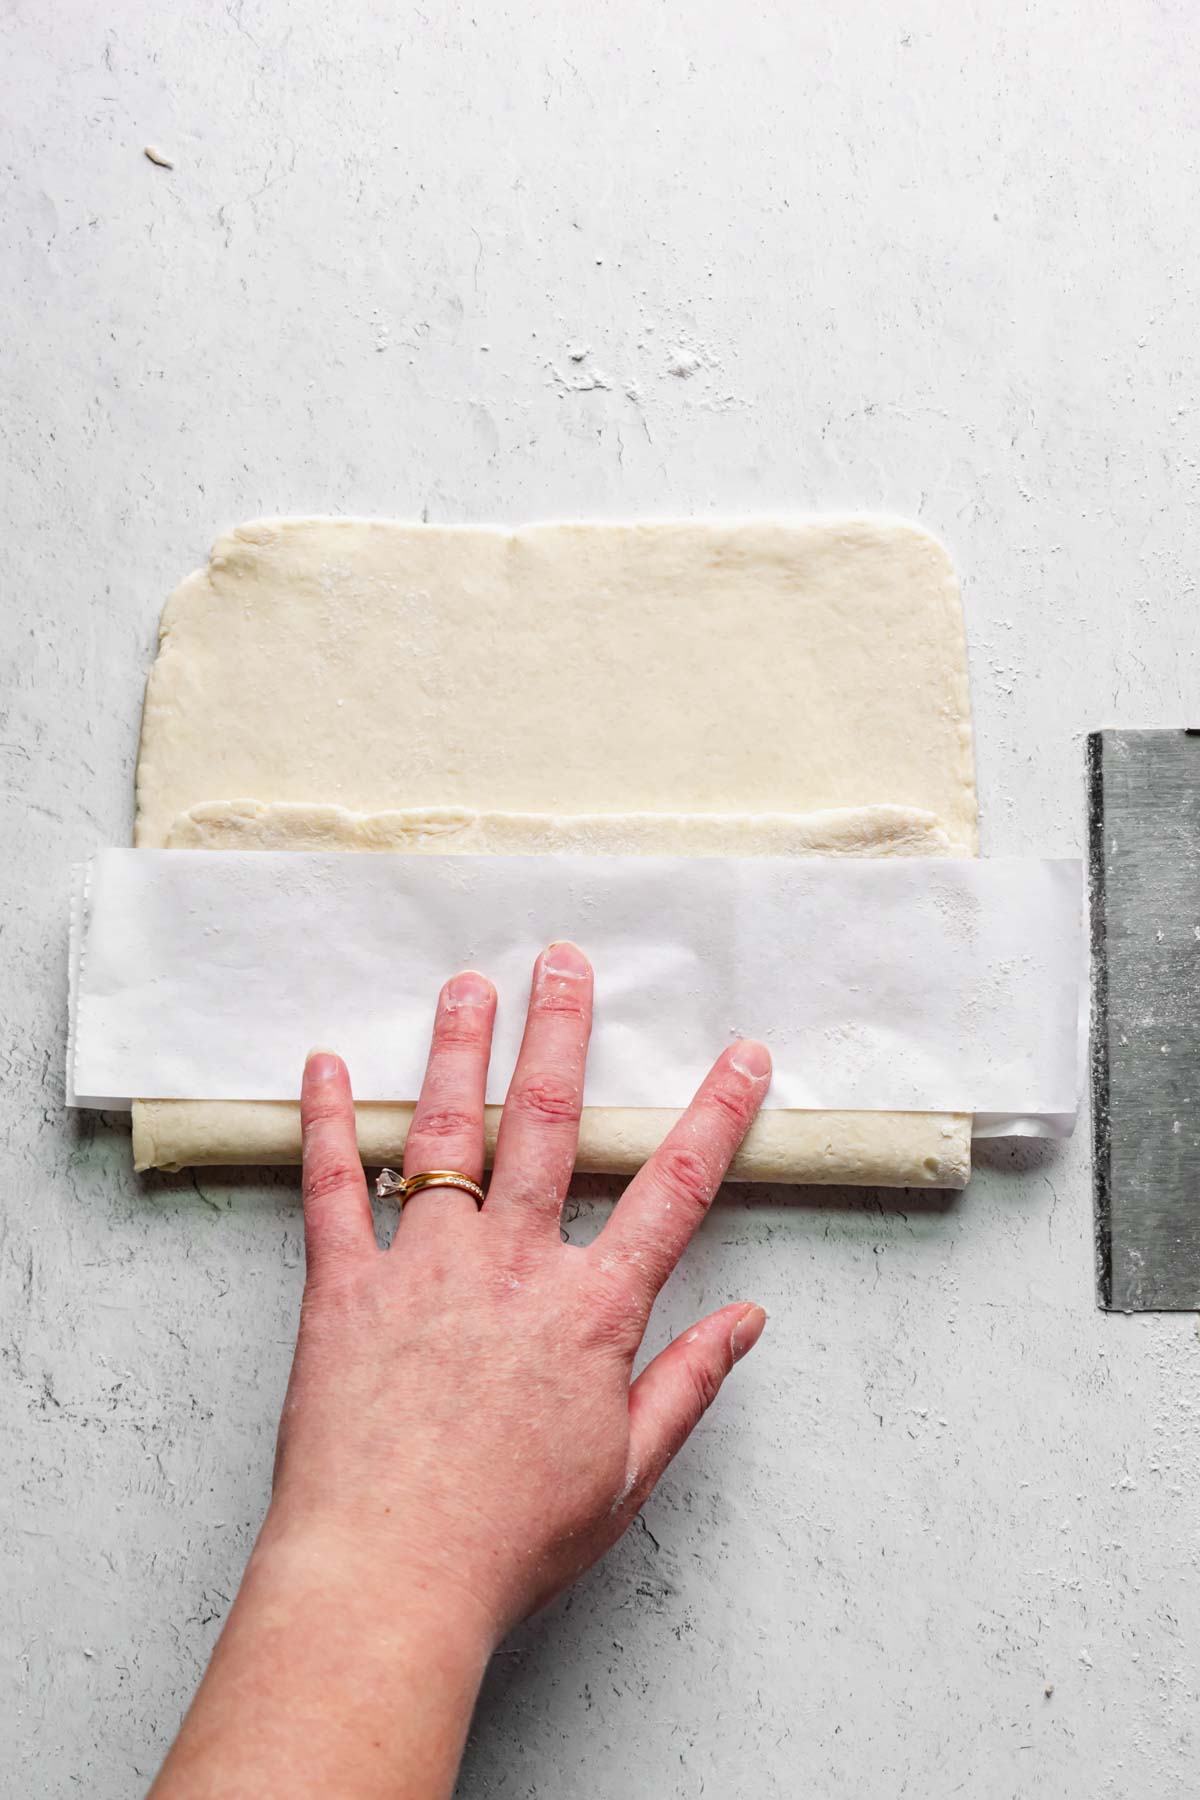 One third of pastry is folded over the parchment, then another strip of parchment is added on top.